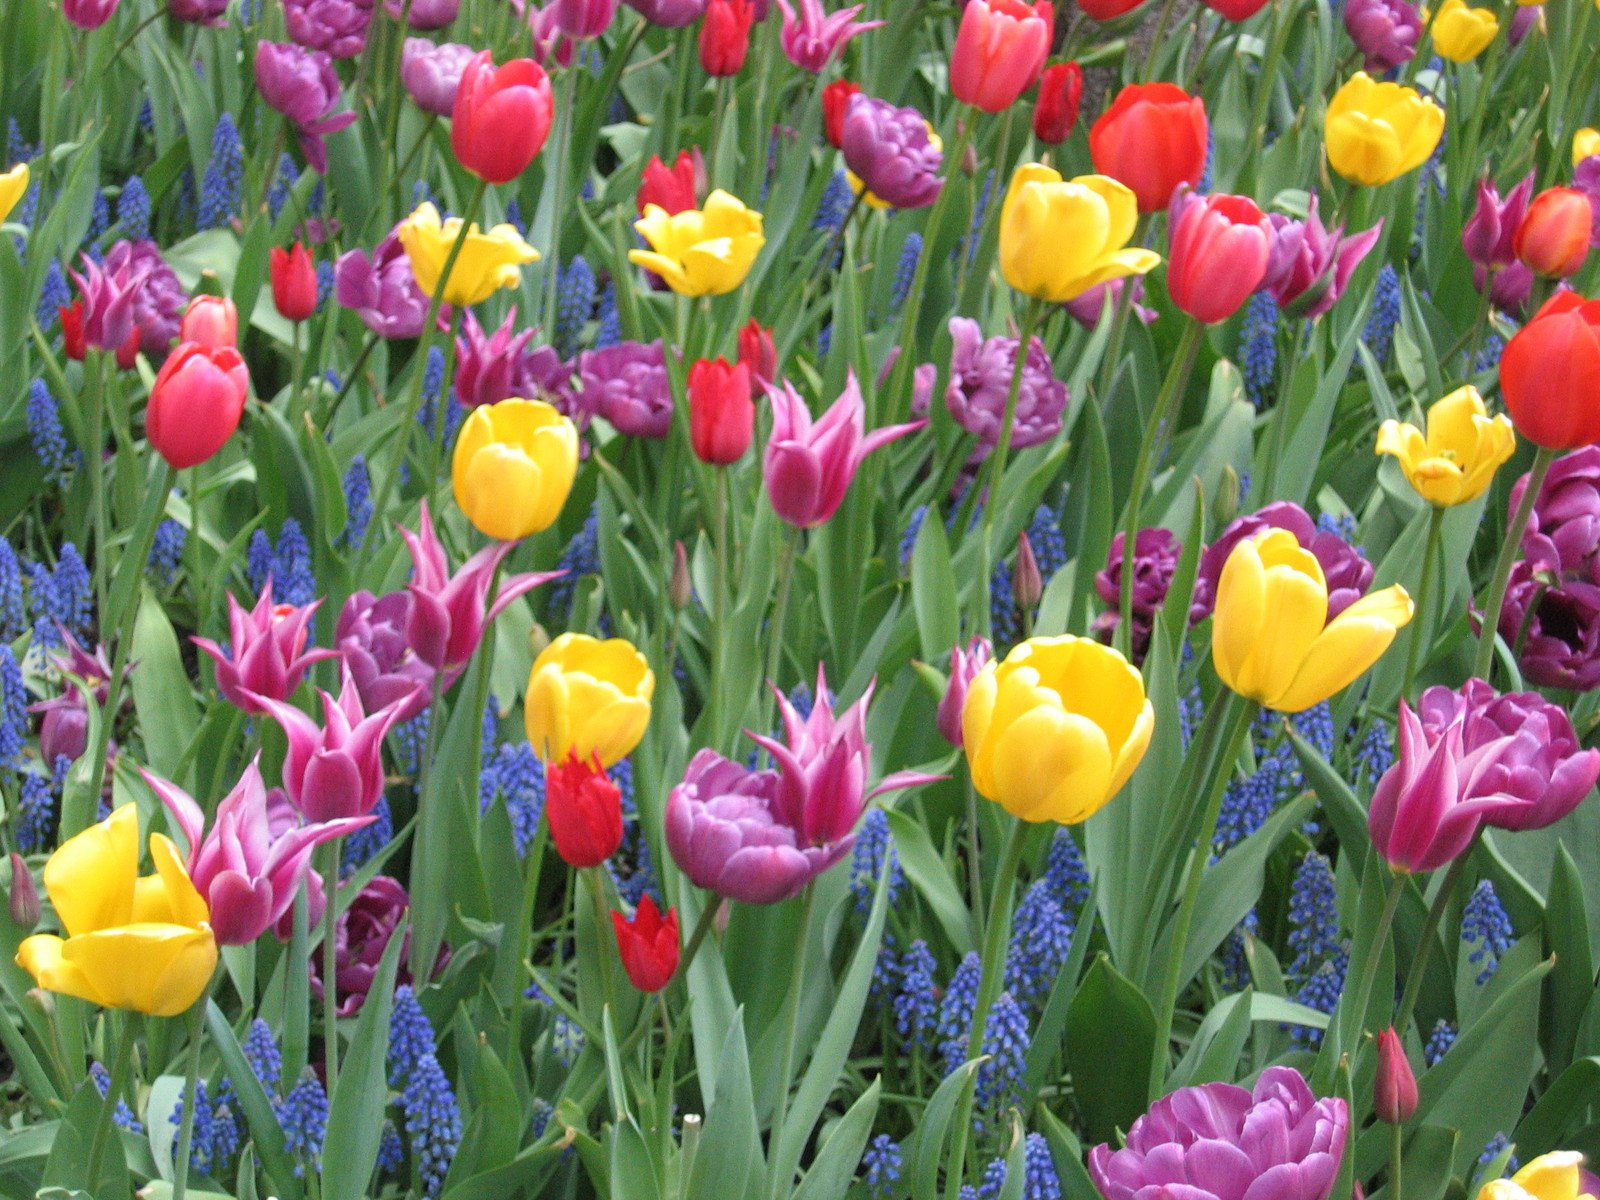 colorful flowers in a garden with many blooming ones